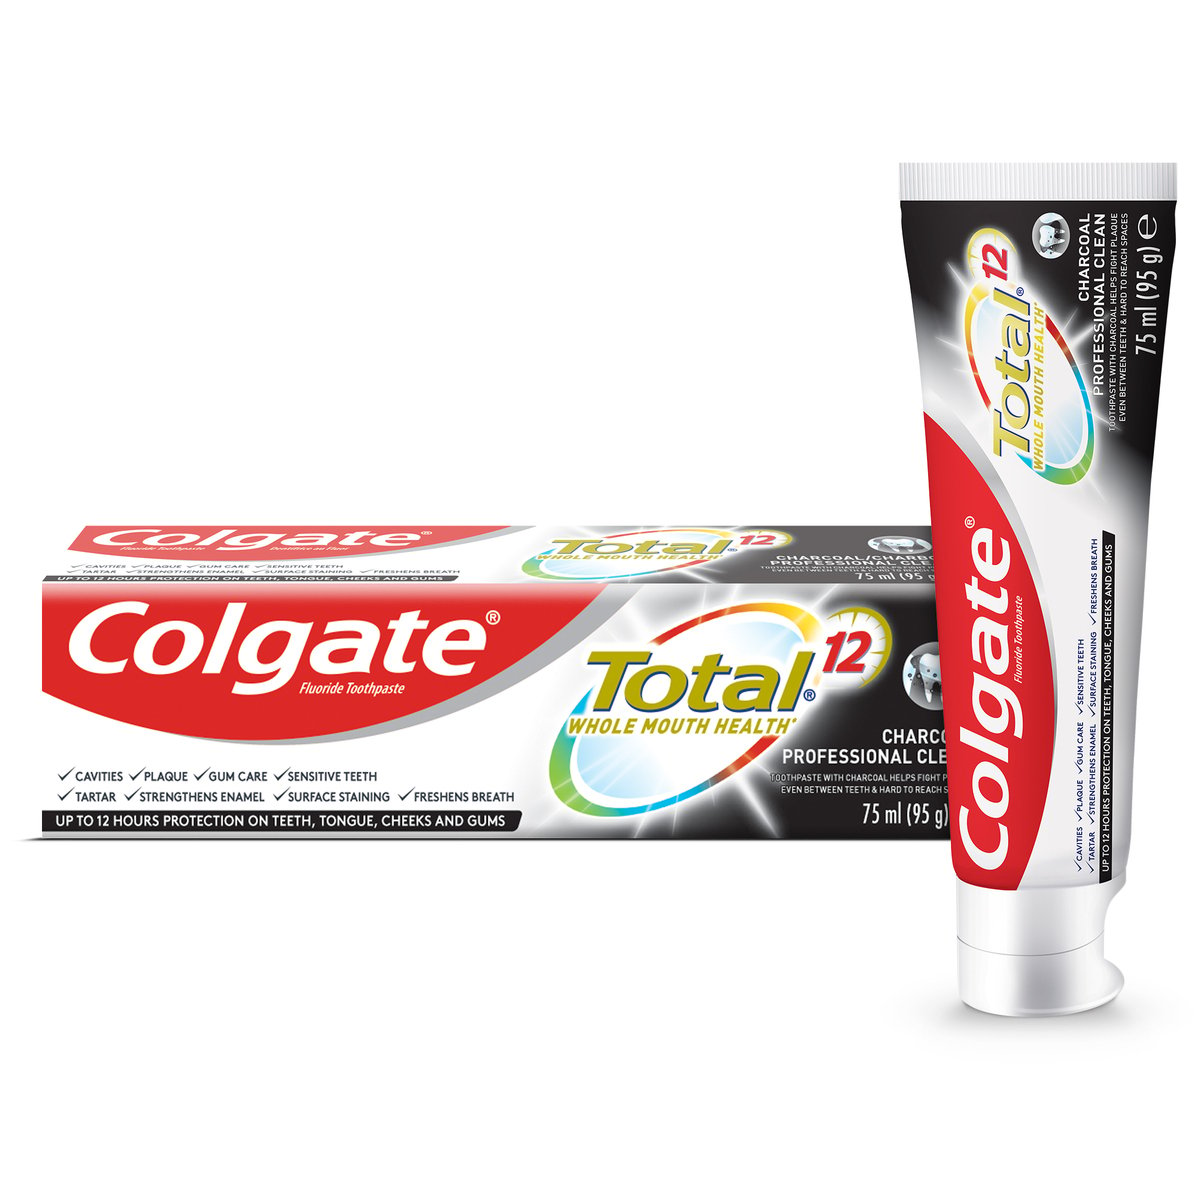 Colgate Total 12 Hour Protection Charcoal Deep Clean Toothpaste 75ml